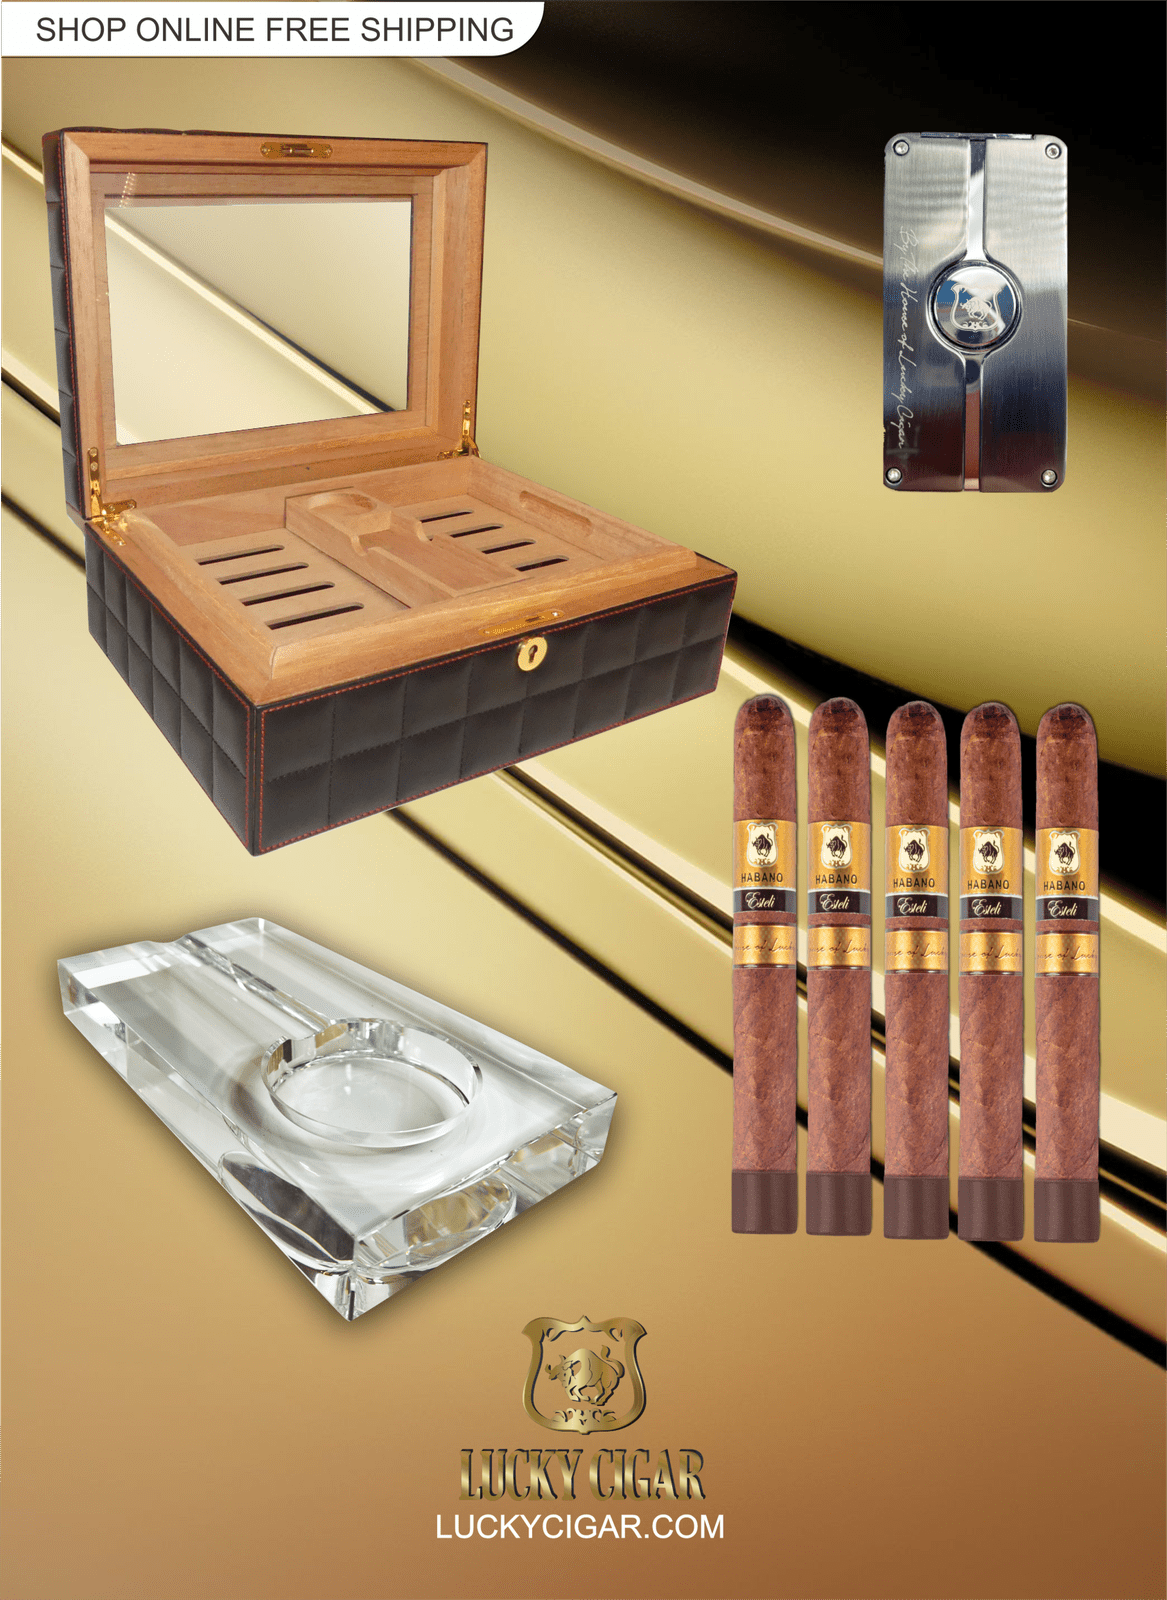 Luxury cigars and cigarettes case collection